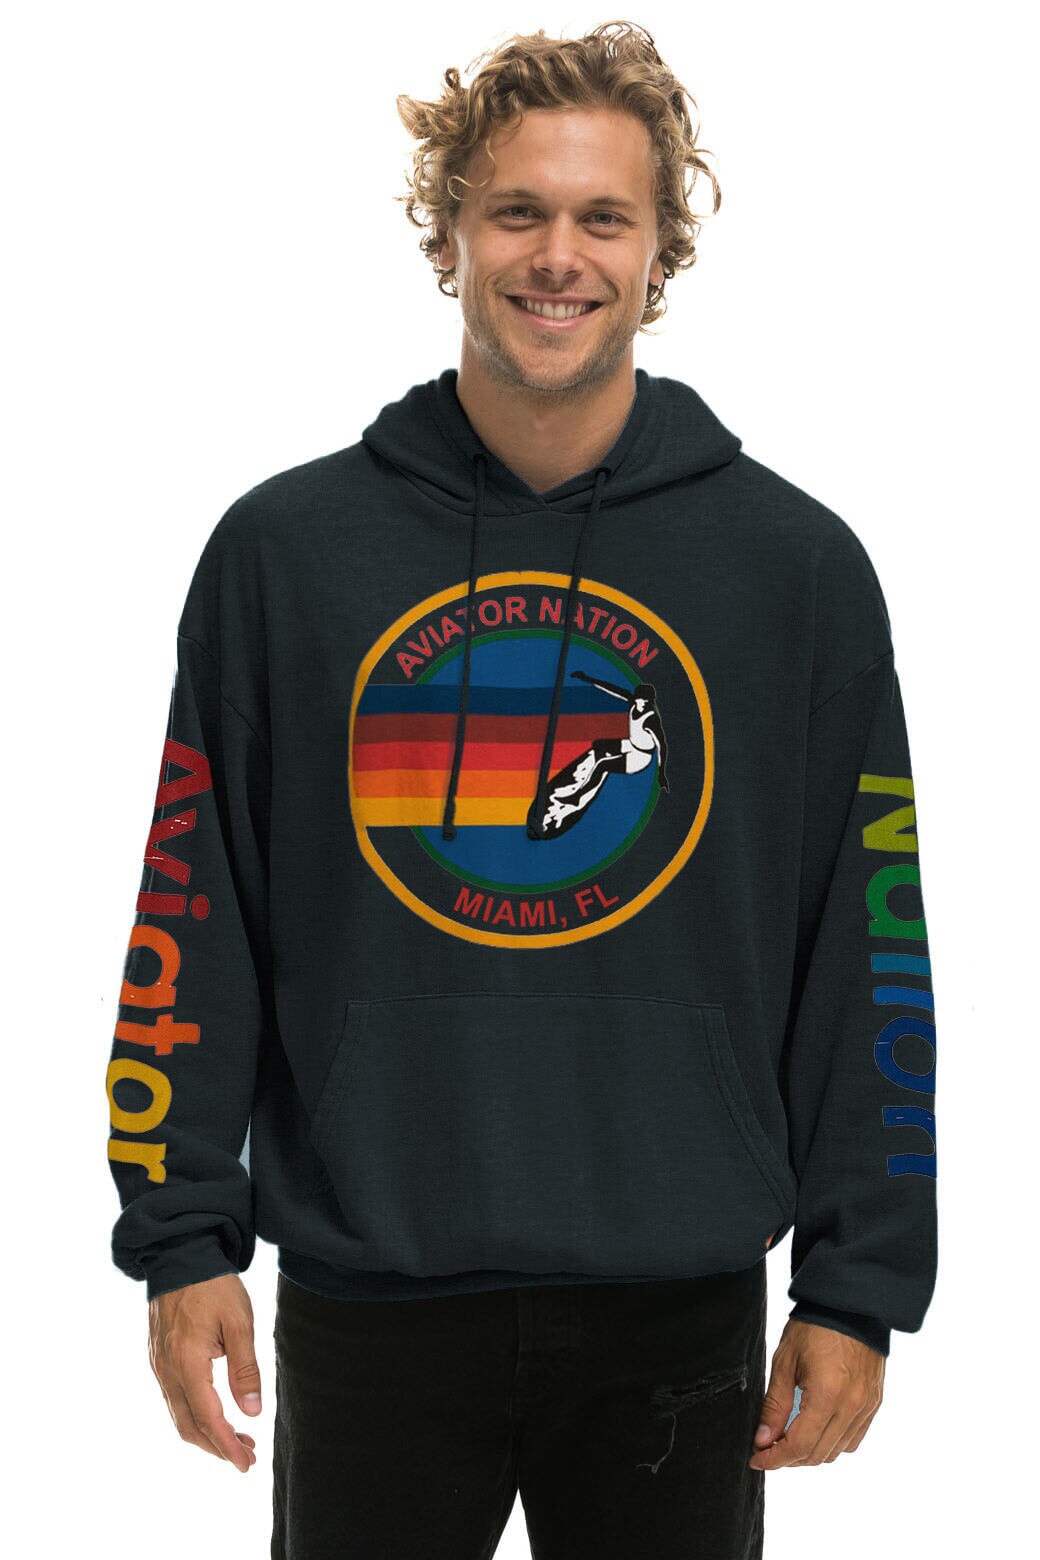 AVIATOR NATION MIAMI RELAXED PULLOVER HOODIE - CHARCOAL Hoodie Aviator Nation 